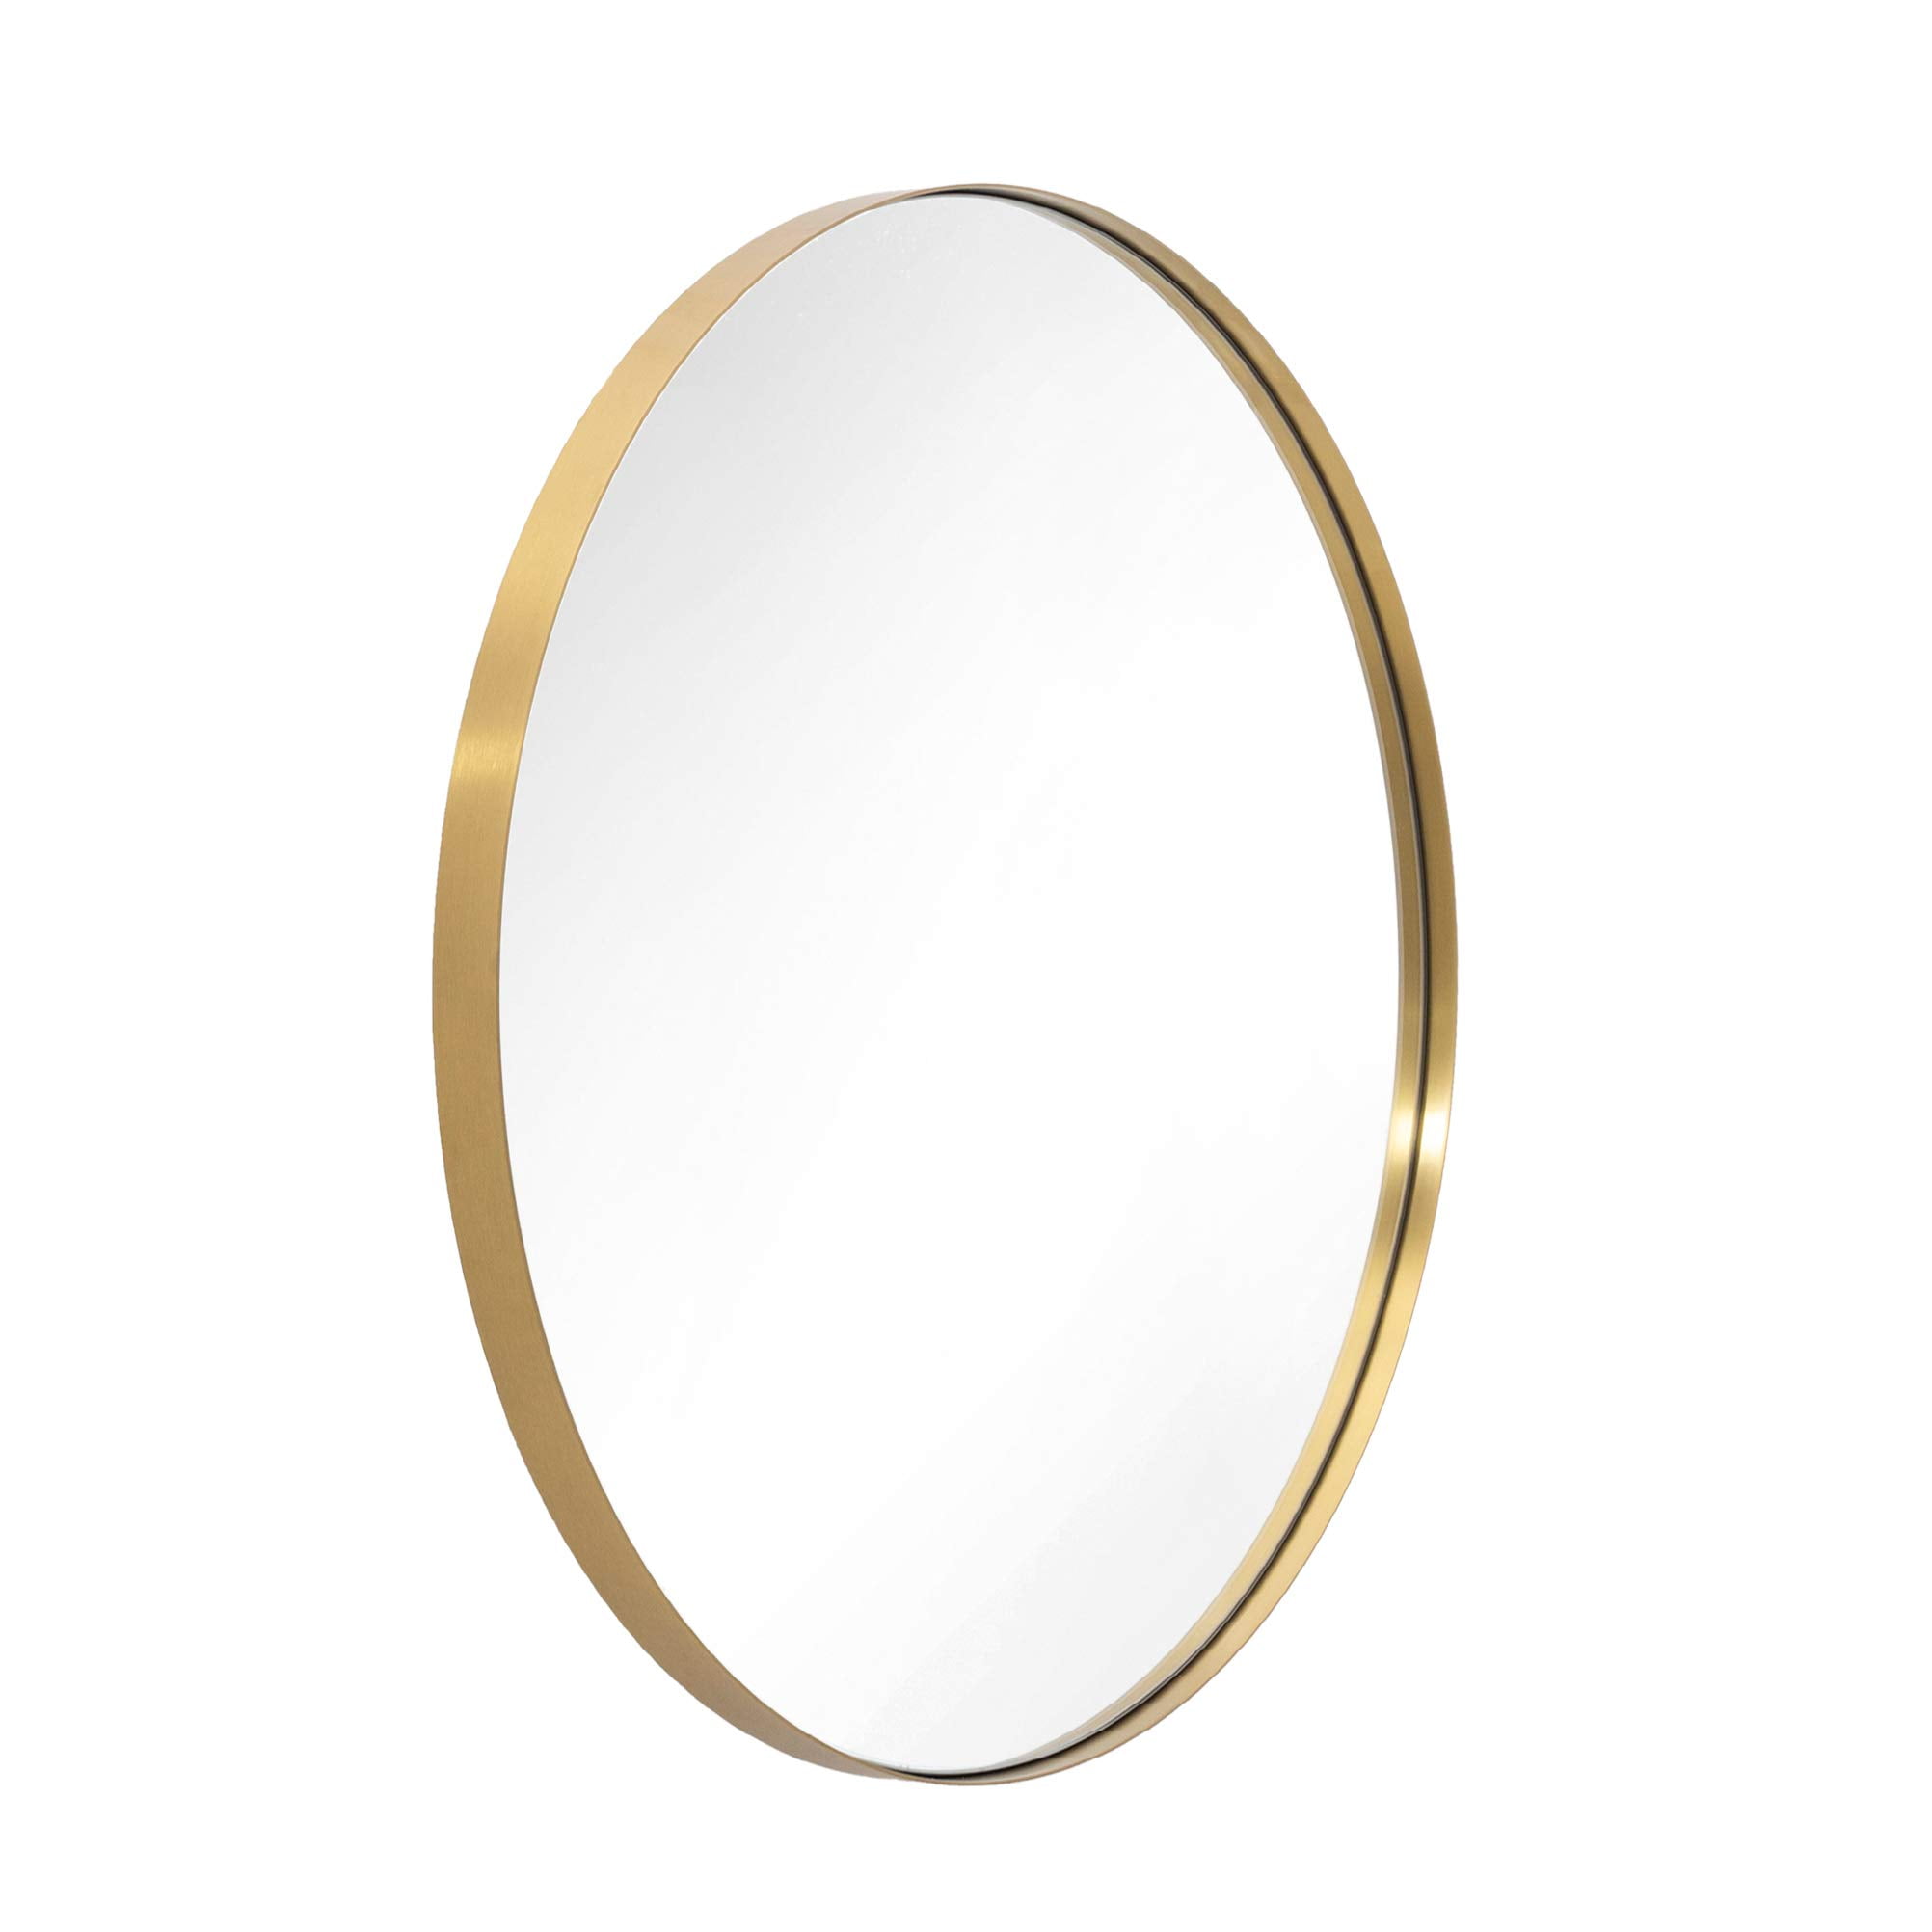 Color : Gold, Size : 40cm Wall Mount Mirror Bathroom Round Metal Framed Wall Mounted Makeup Shaving Mirror Bedroom Decor with Bird Bathroom